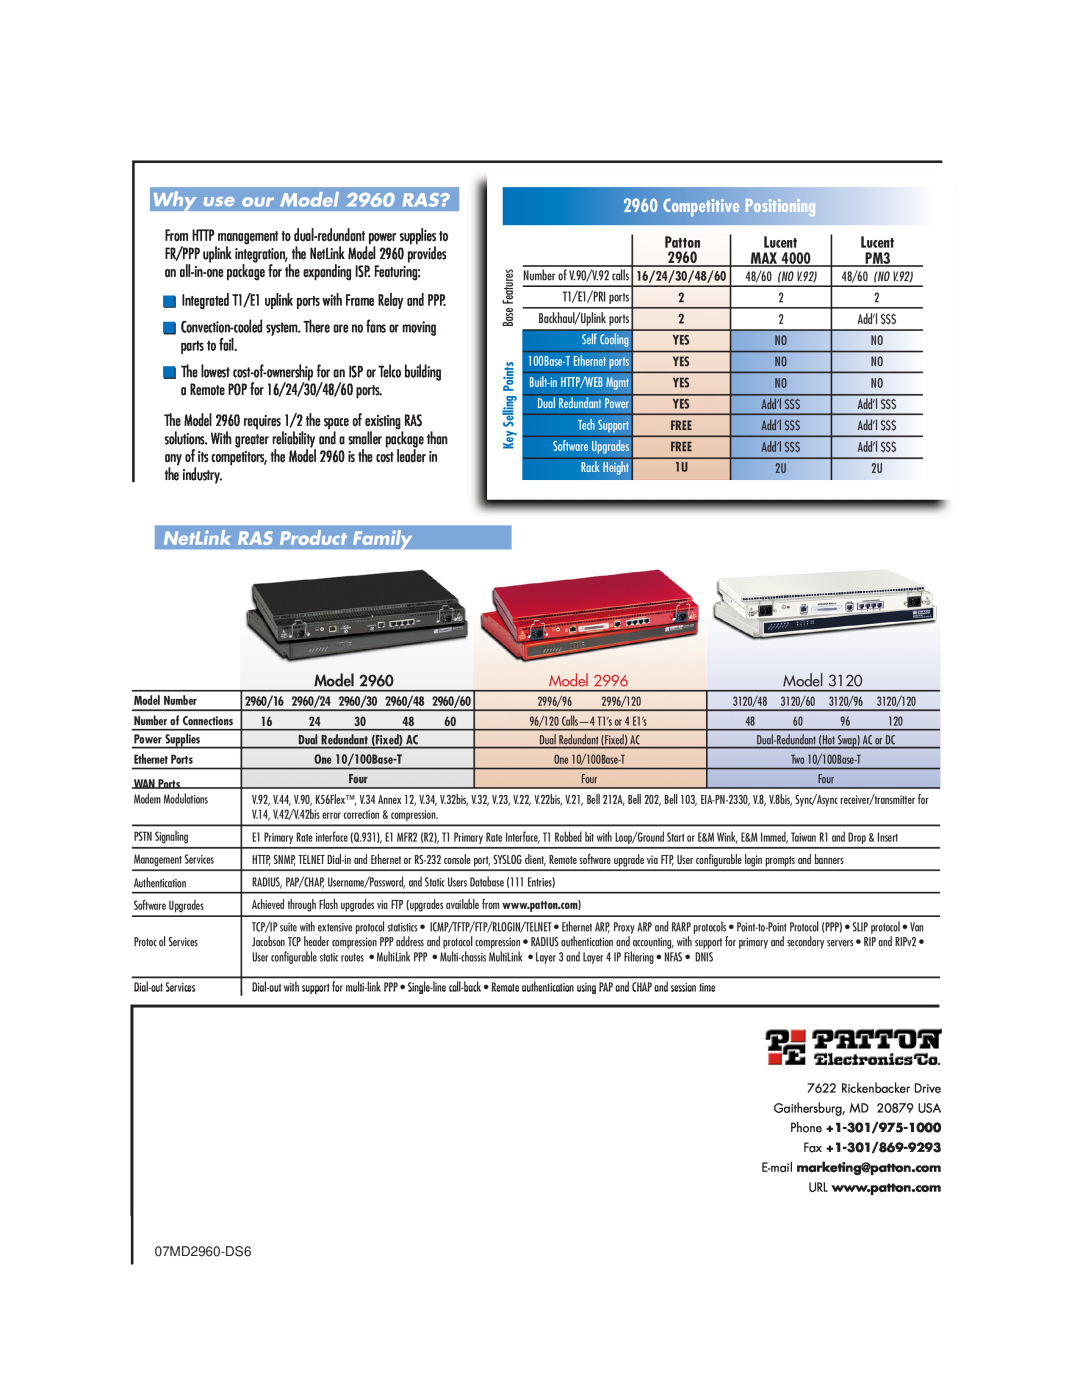 Patton electronic Features, T1/E1/PRI ports, Why use our Model 2960 RAS?, 2960CompetitivePositioning, Self Cooling 